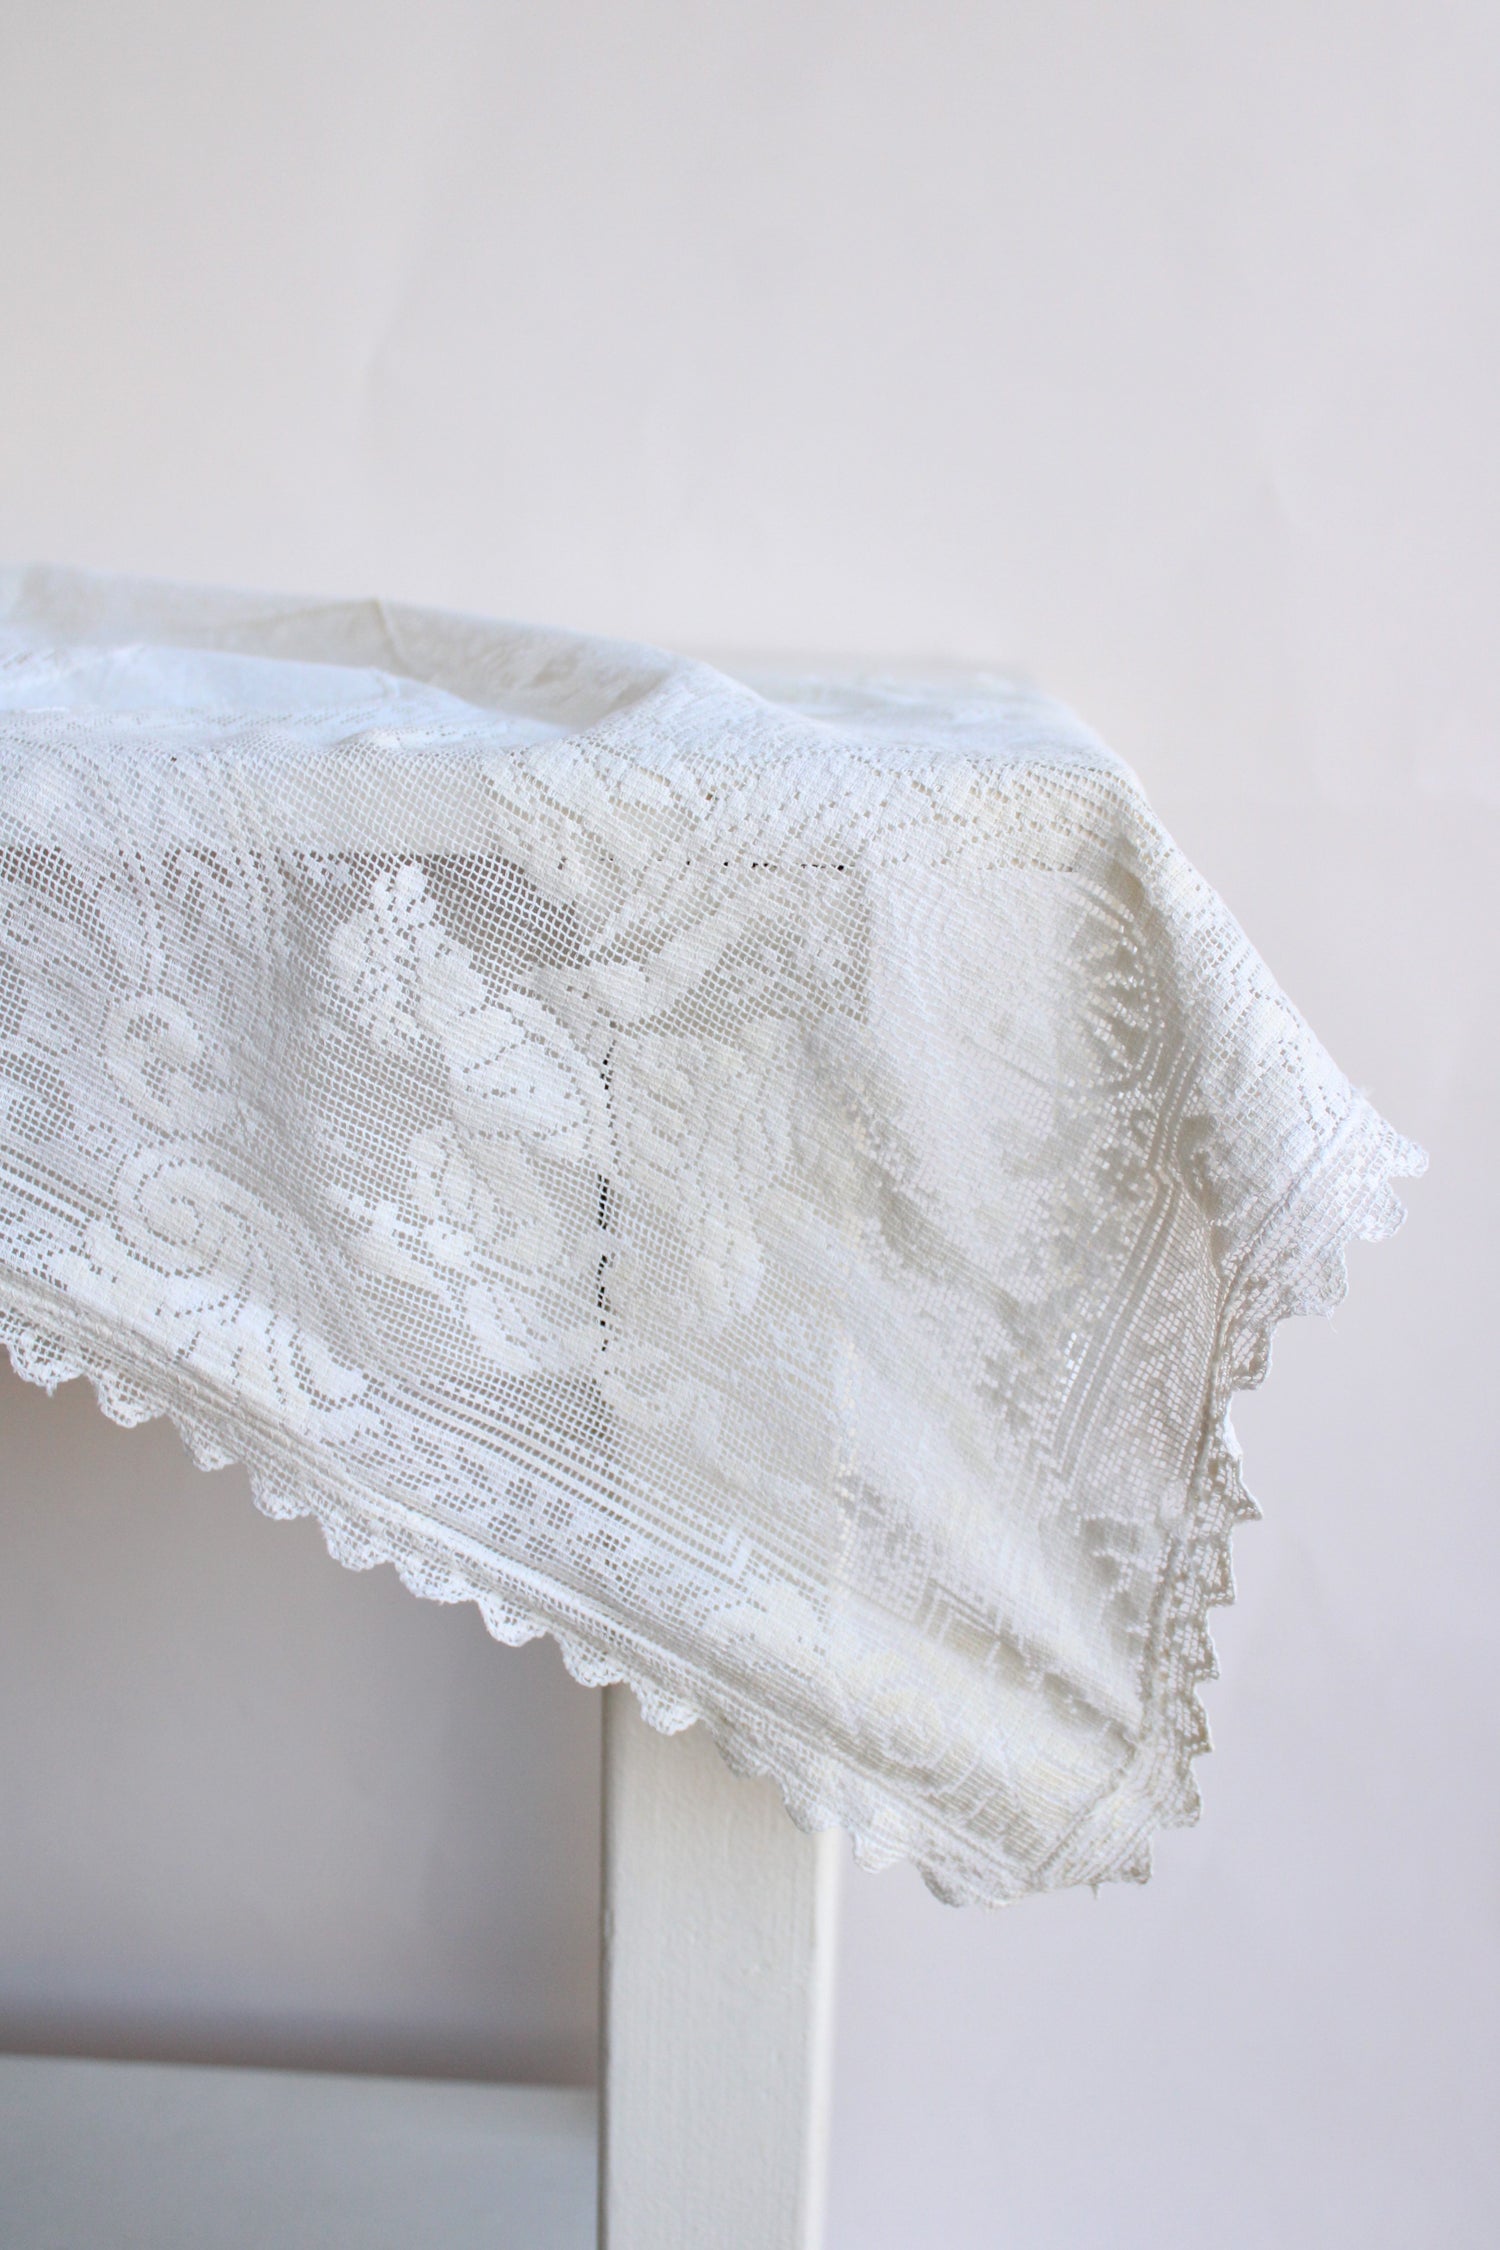 Antique 190s 1920s Lace Table Runner with a Greek theme